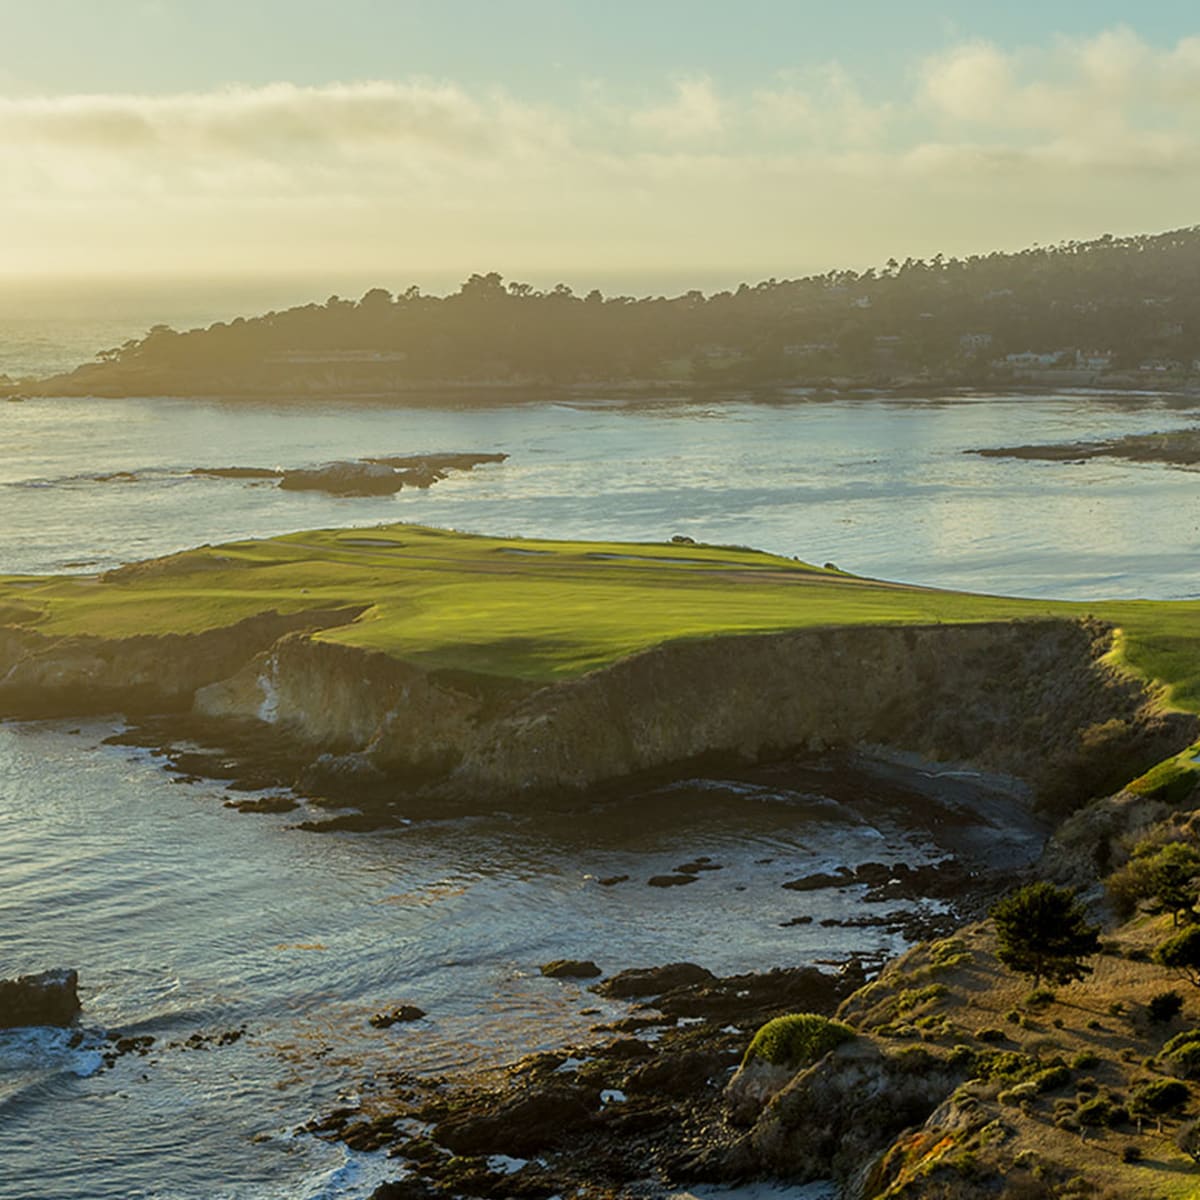 The Golfers 4-Day Weekend in Monterey and Carmel, California